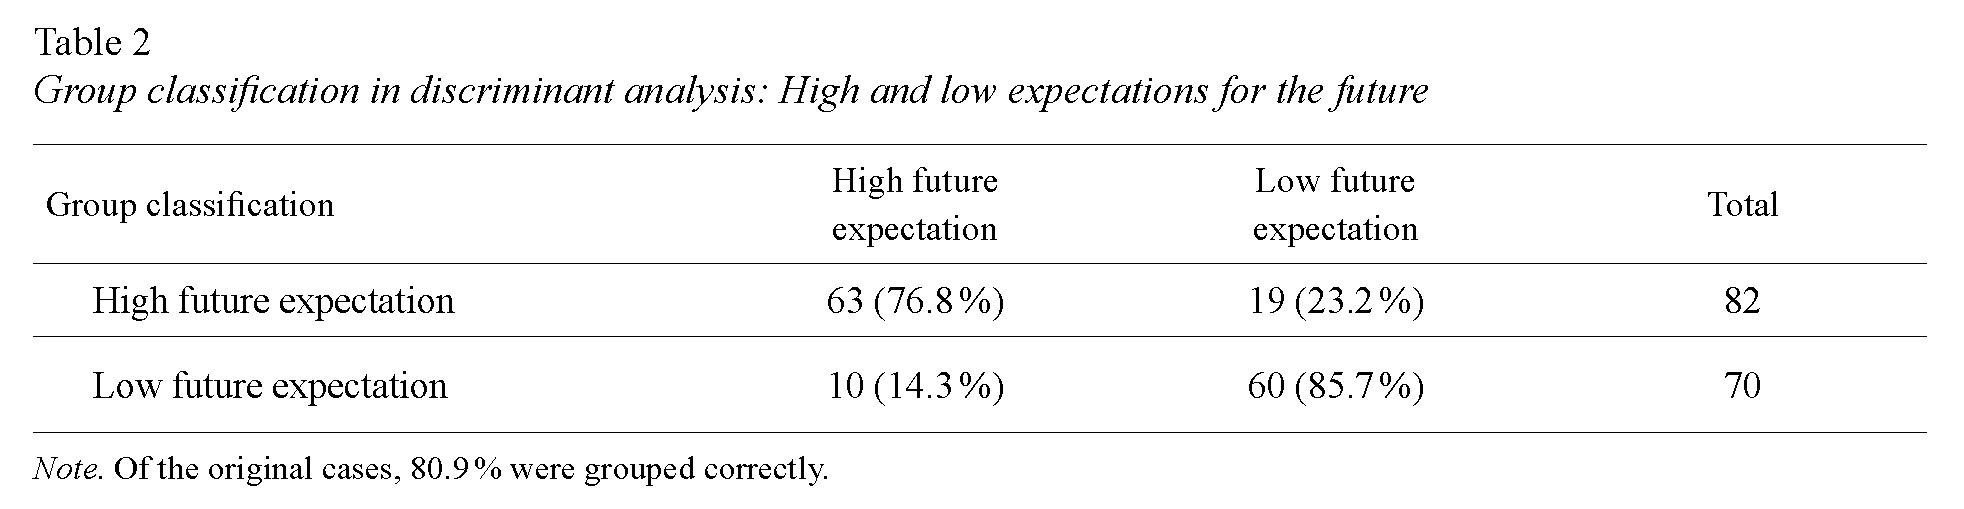 Group classification in discriminant analysis: High and low expectations for the future